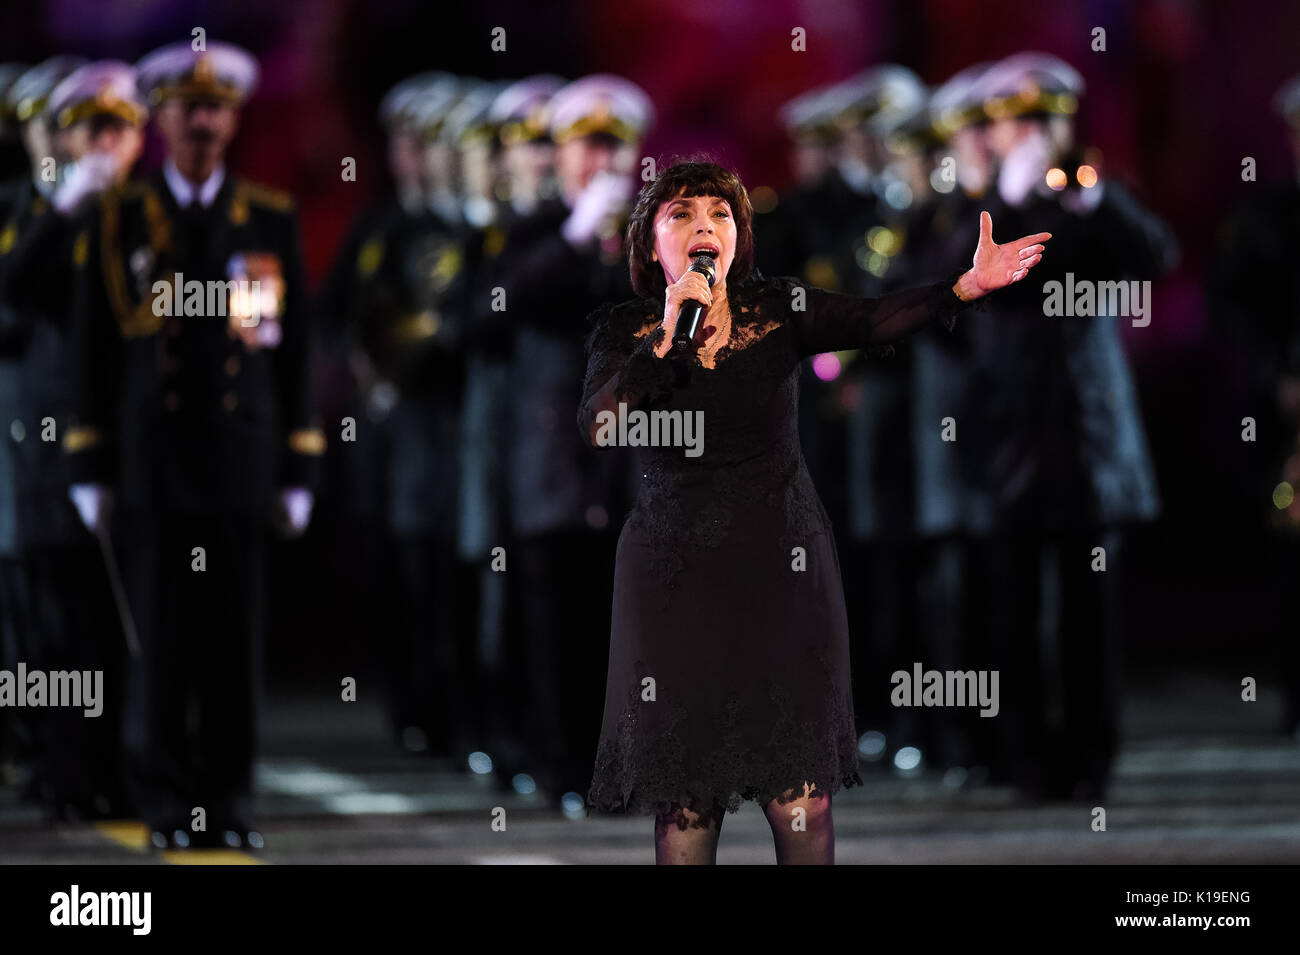 Moscow, Russia. 26th Aug, 2017. French singer Mireille Mathieu performs during the 'Spasskaya Tower' International Military Music Festival in Moscow, Russia, on August 26, 2017. The 'Spasskaya Tower' International Military Music Festival opened on Red Square in Moscow on Saturday. Credit: Evgeny Sinitsyn/Xinhua/Alamy Live News Stock Photo